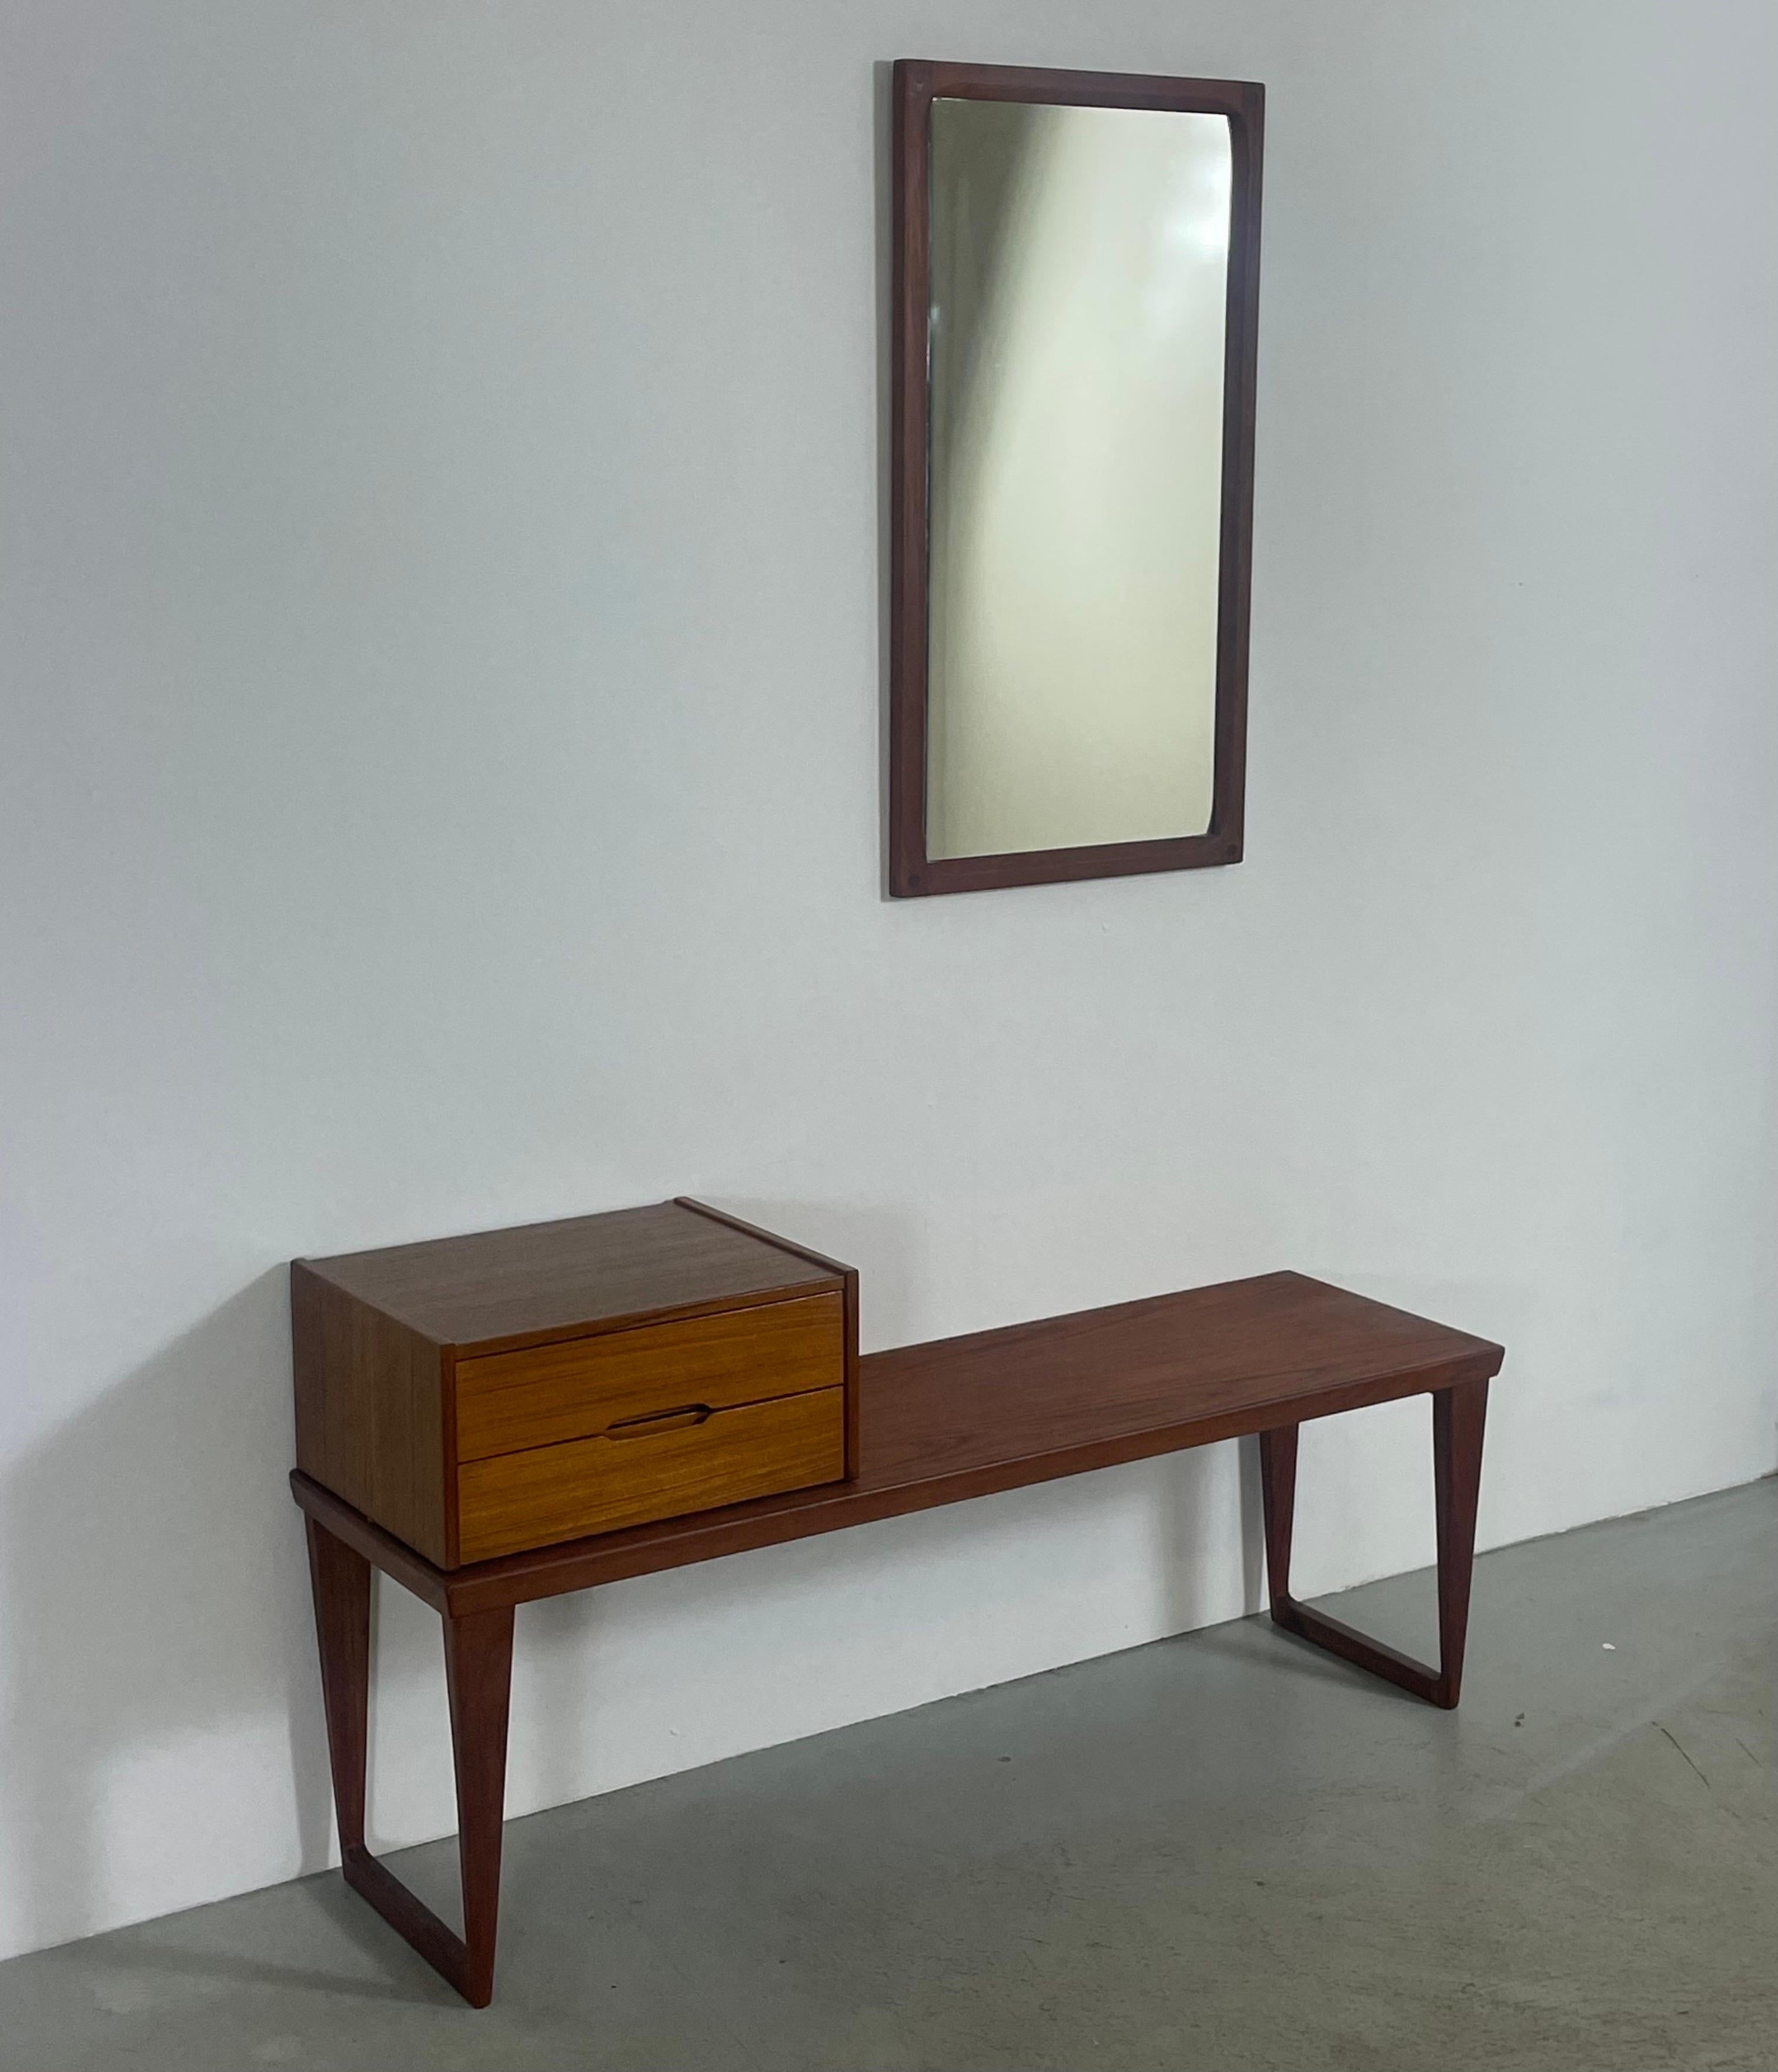 This Scandinavian hallway set was designed by Danish architect Kai Kristiansen for Aksel Kjersgaard. Made in Denmark during the 1960s. The set consists of a freestanding beside table, with a free standing drawer module/chest on top and a matching